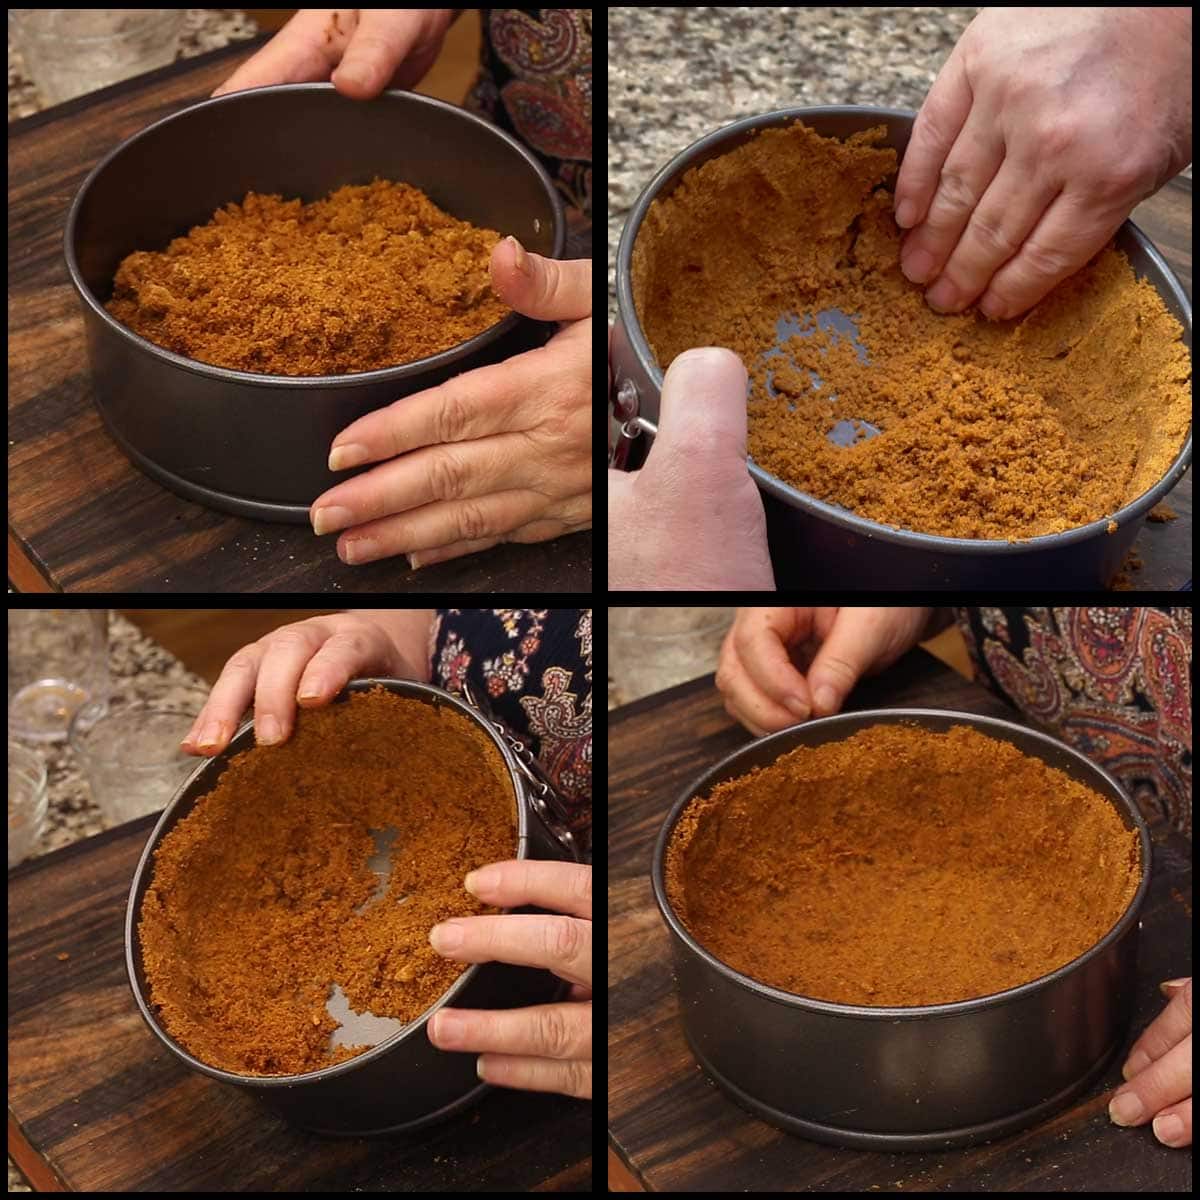 forming the crust in the springform pan